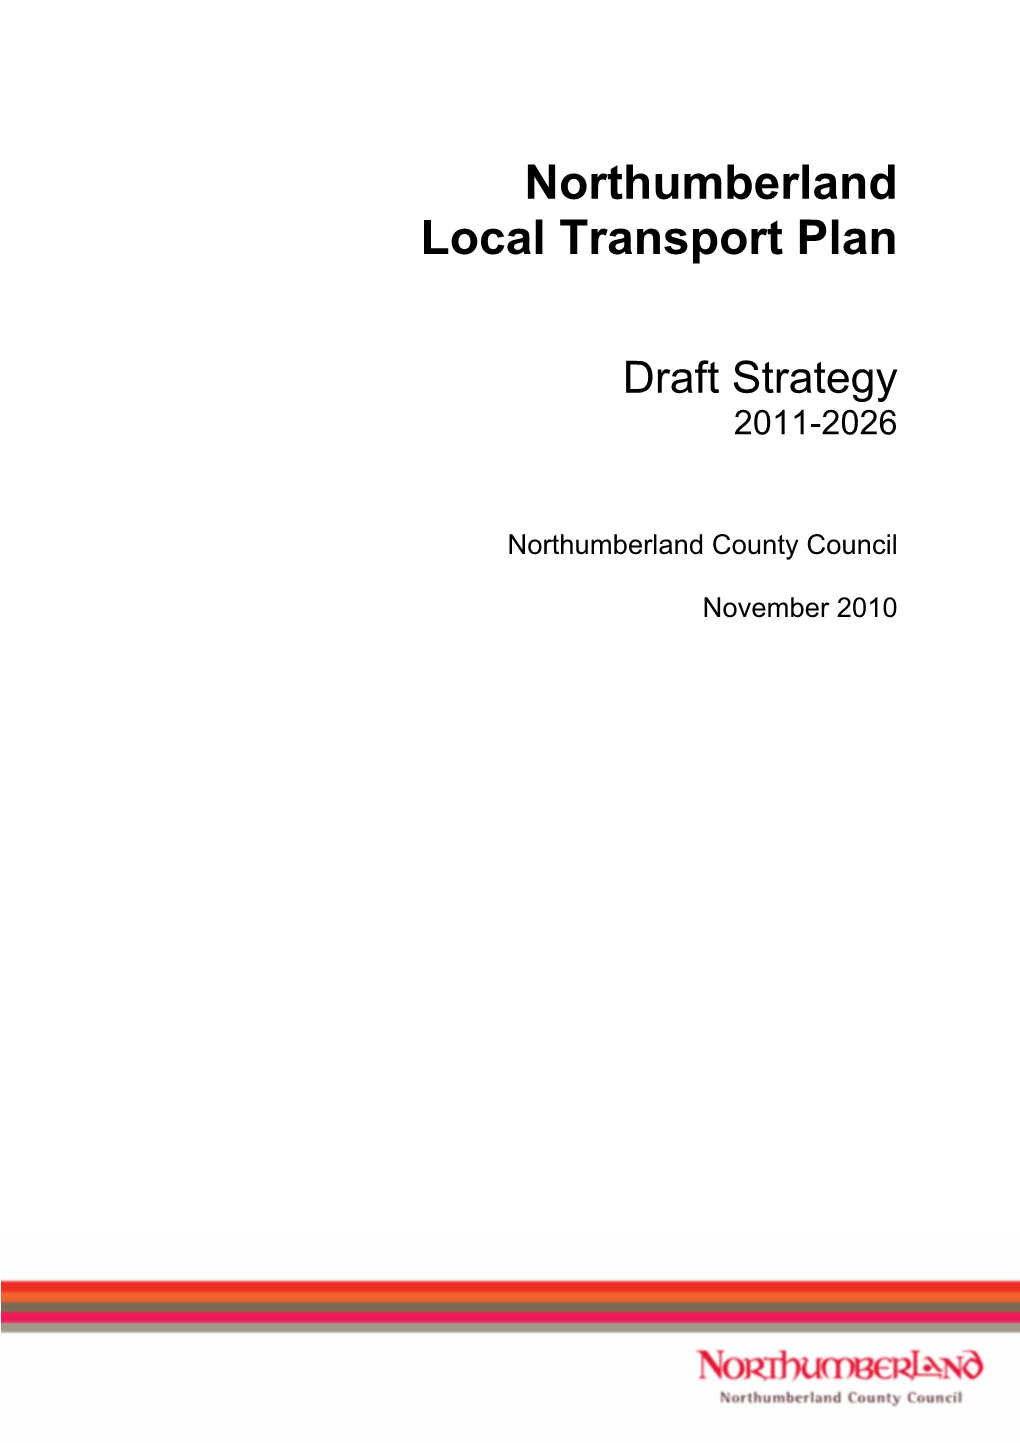 Draft Northumberland Local Transport Plan Contents